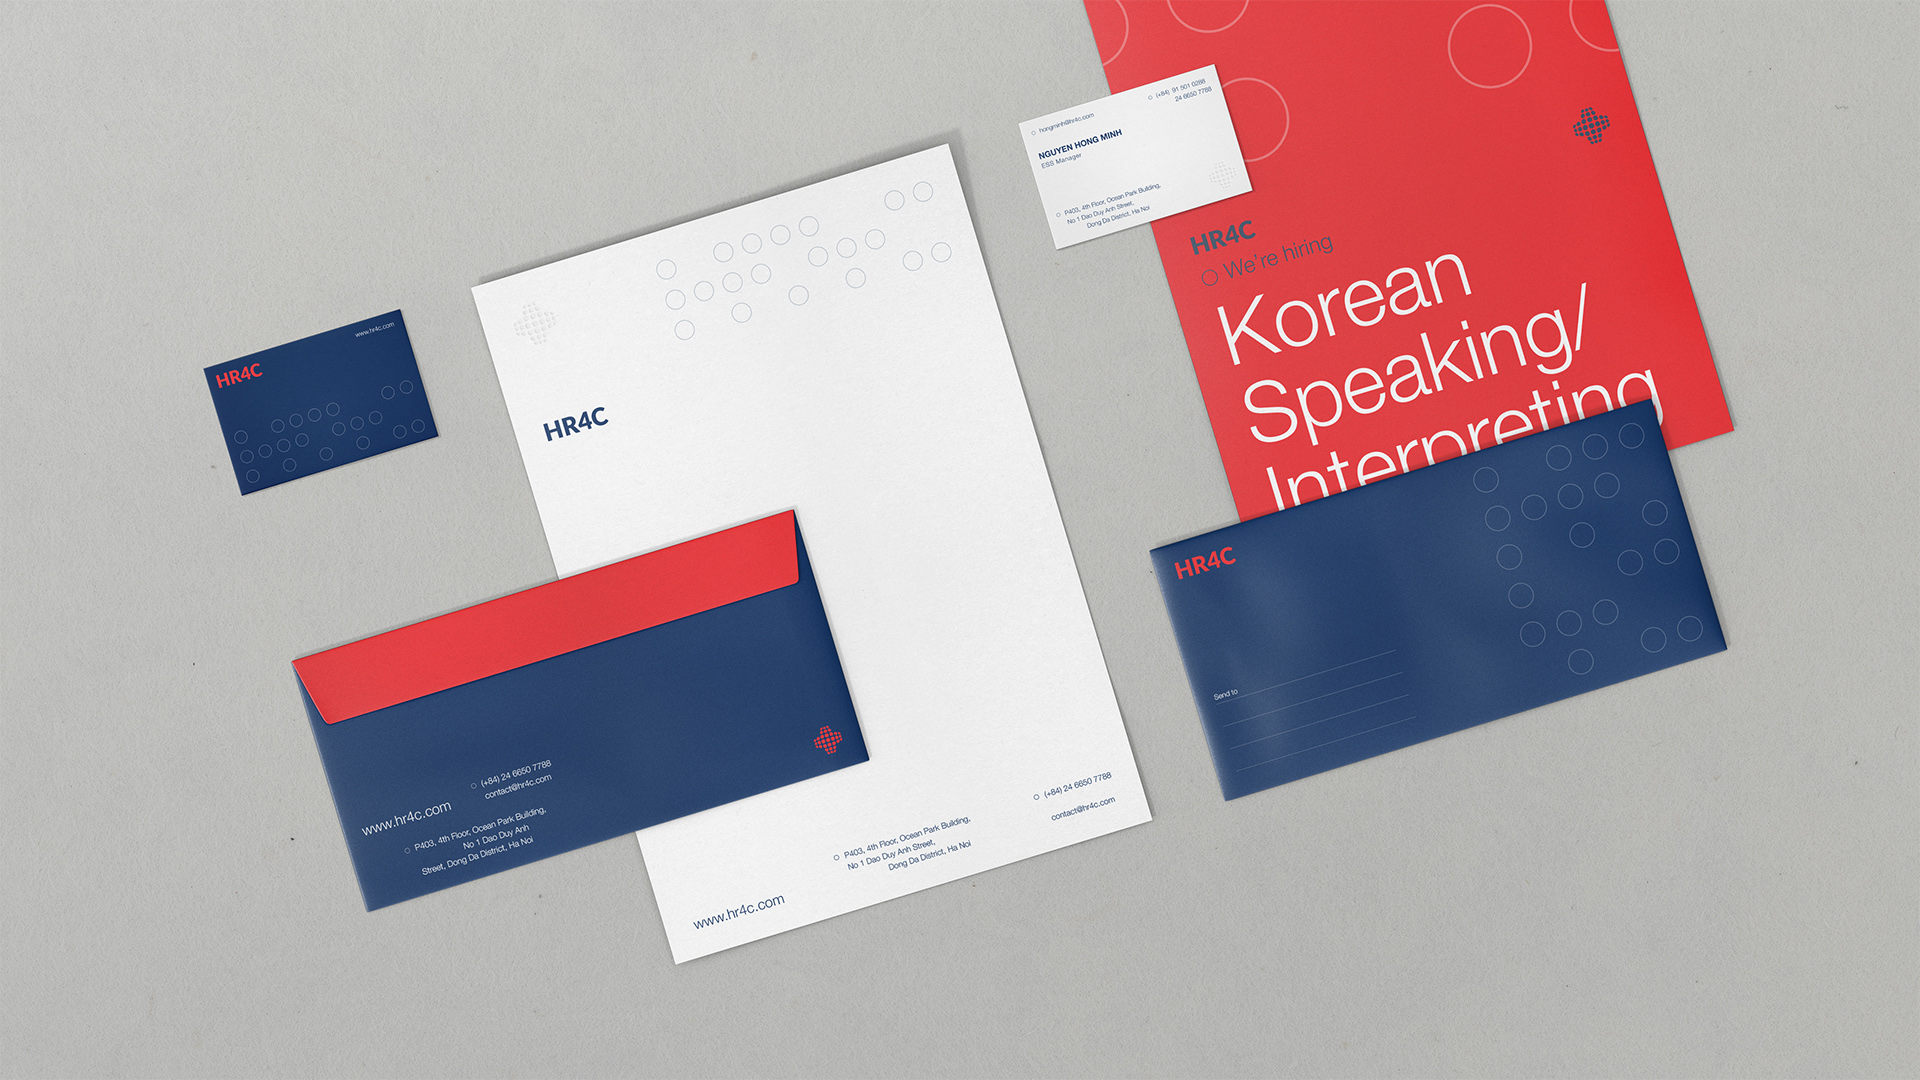 Duong Tran Creates New Brand Identity for HR4C Human Resource Consulting Firm